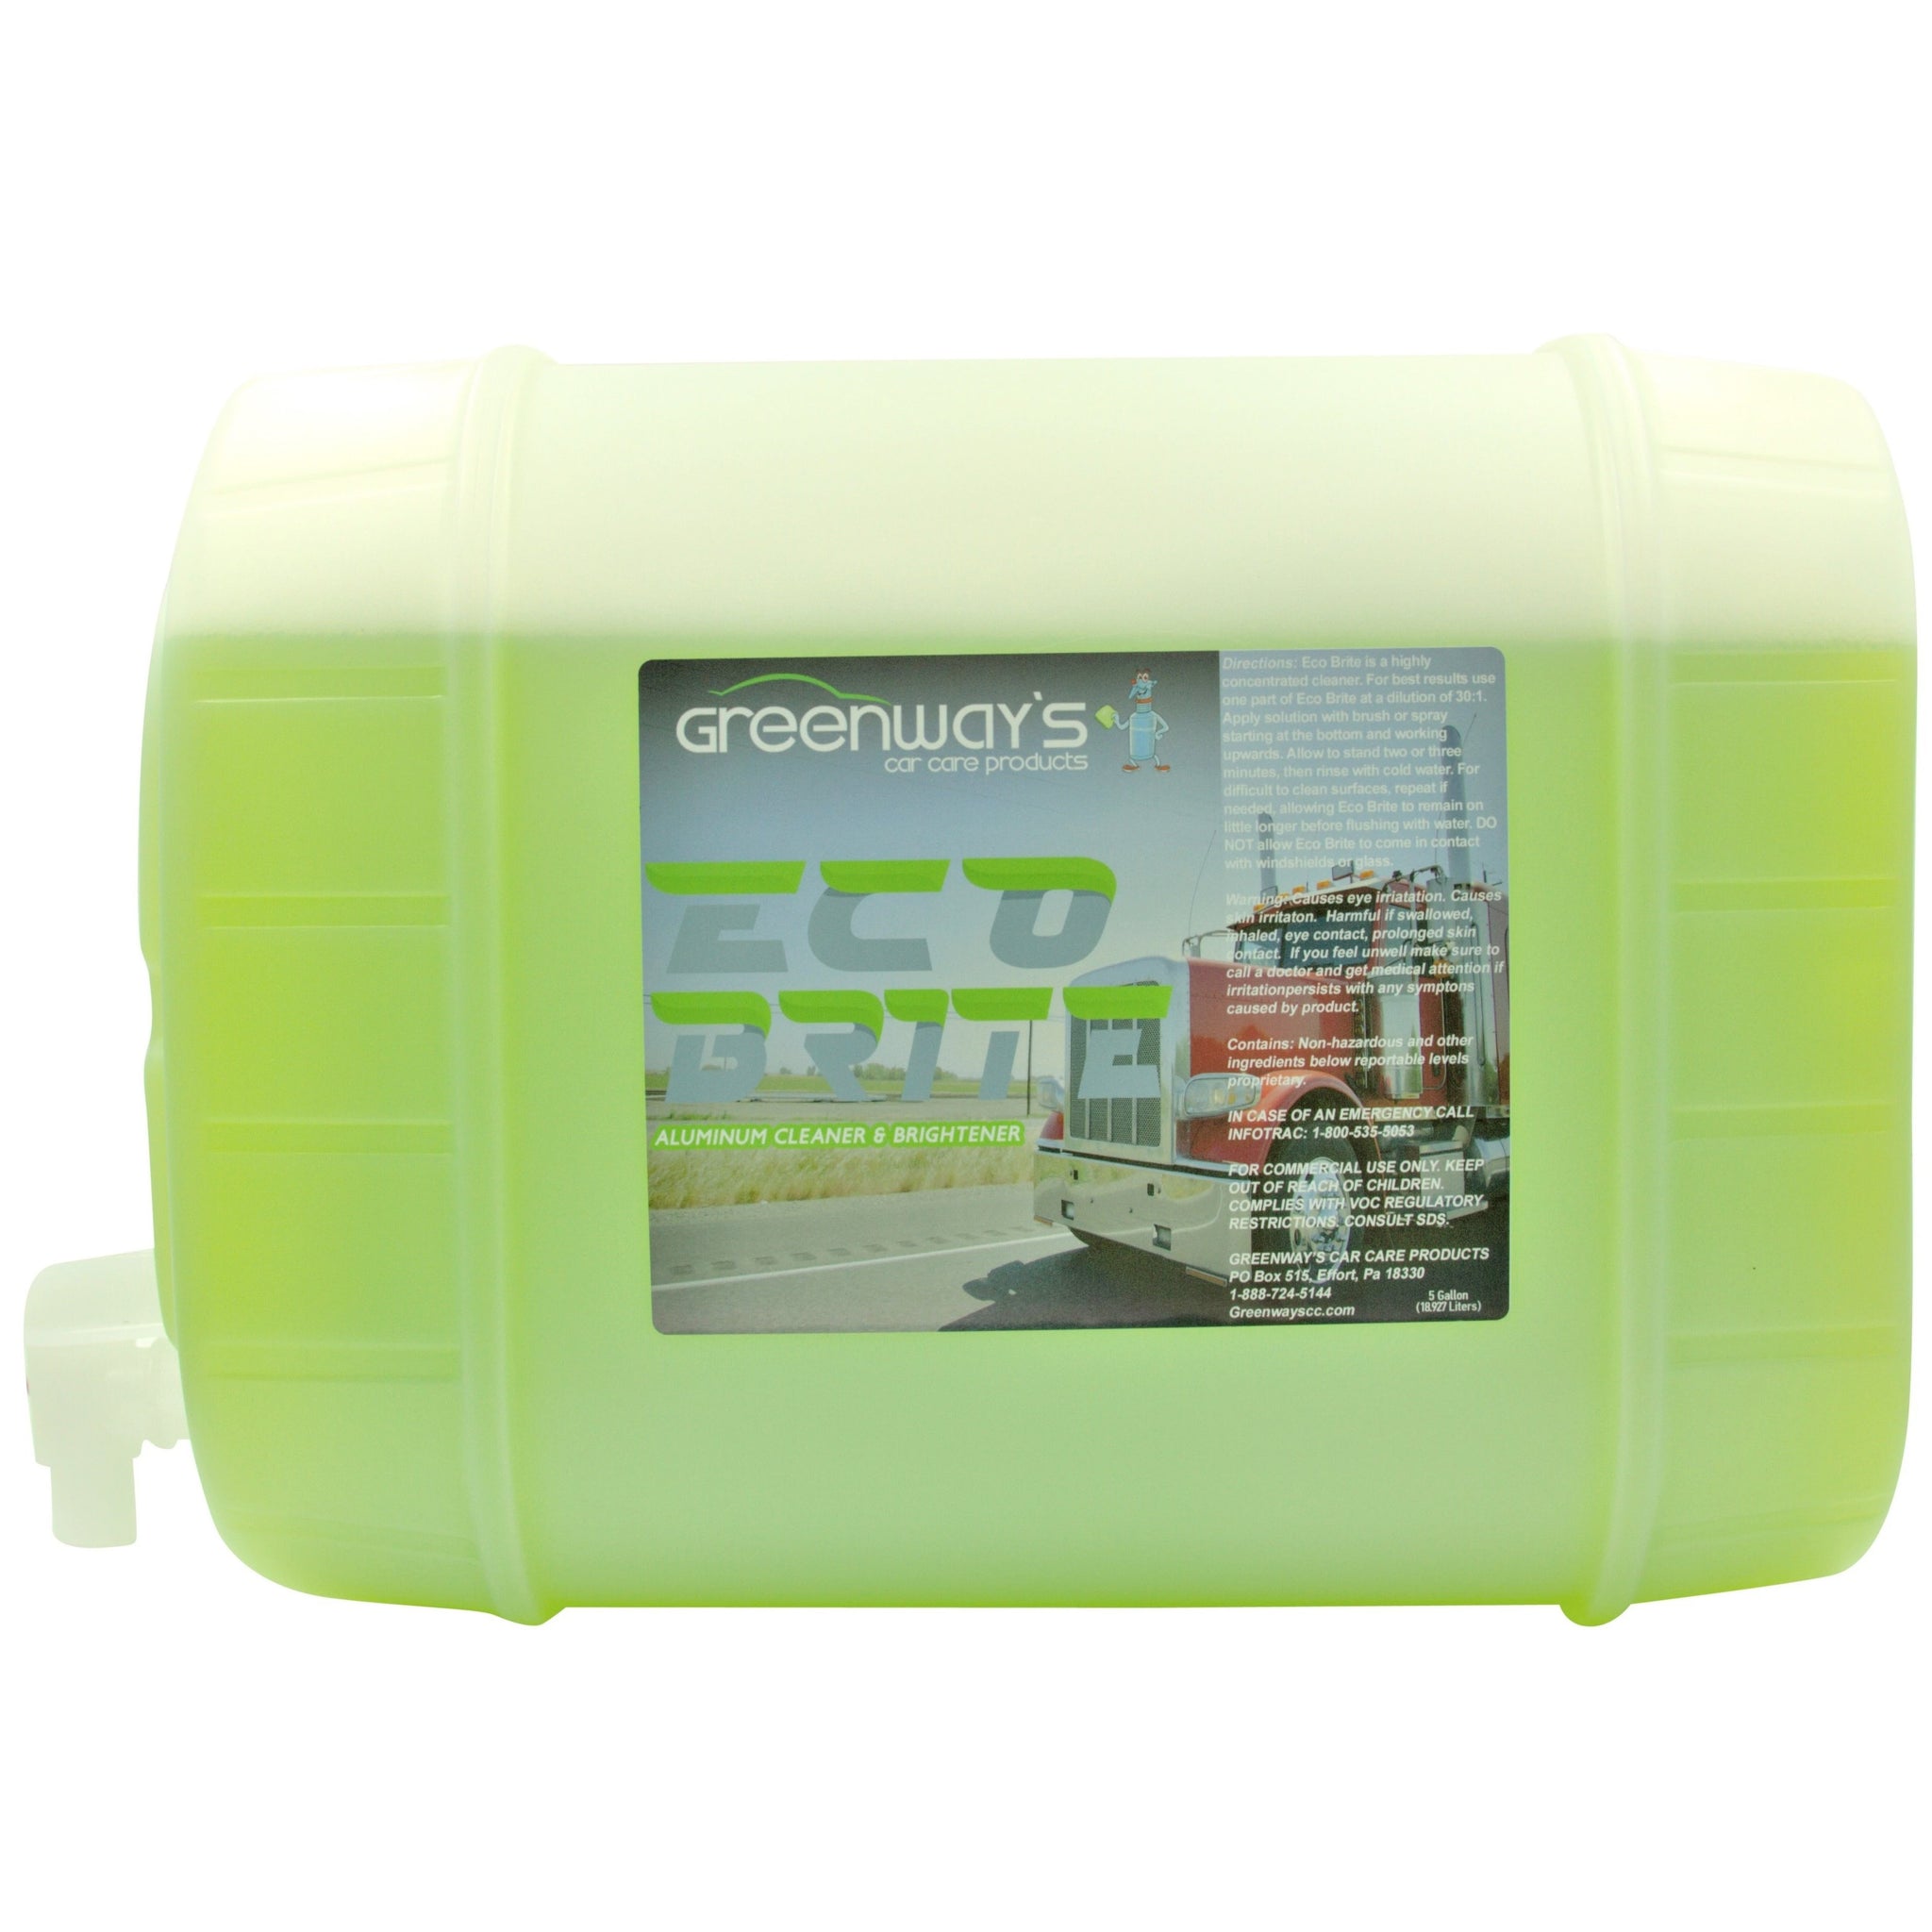 Greenway’s Eco Brite, concentrated, acid-free, eco-friendly, maintenance aluminum wheel cleaner and degreaser, 5 gallons.